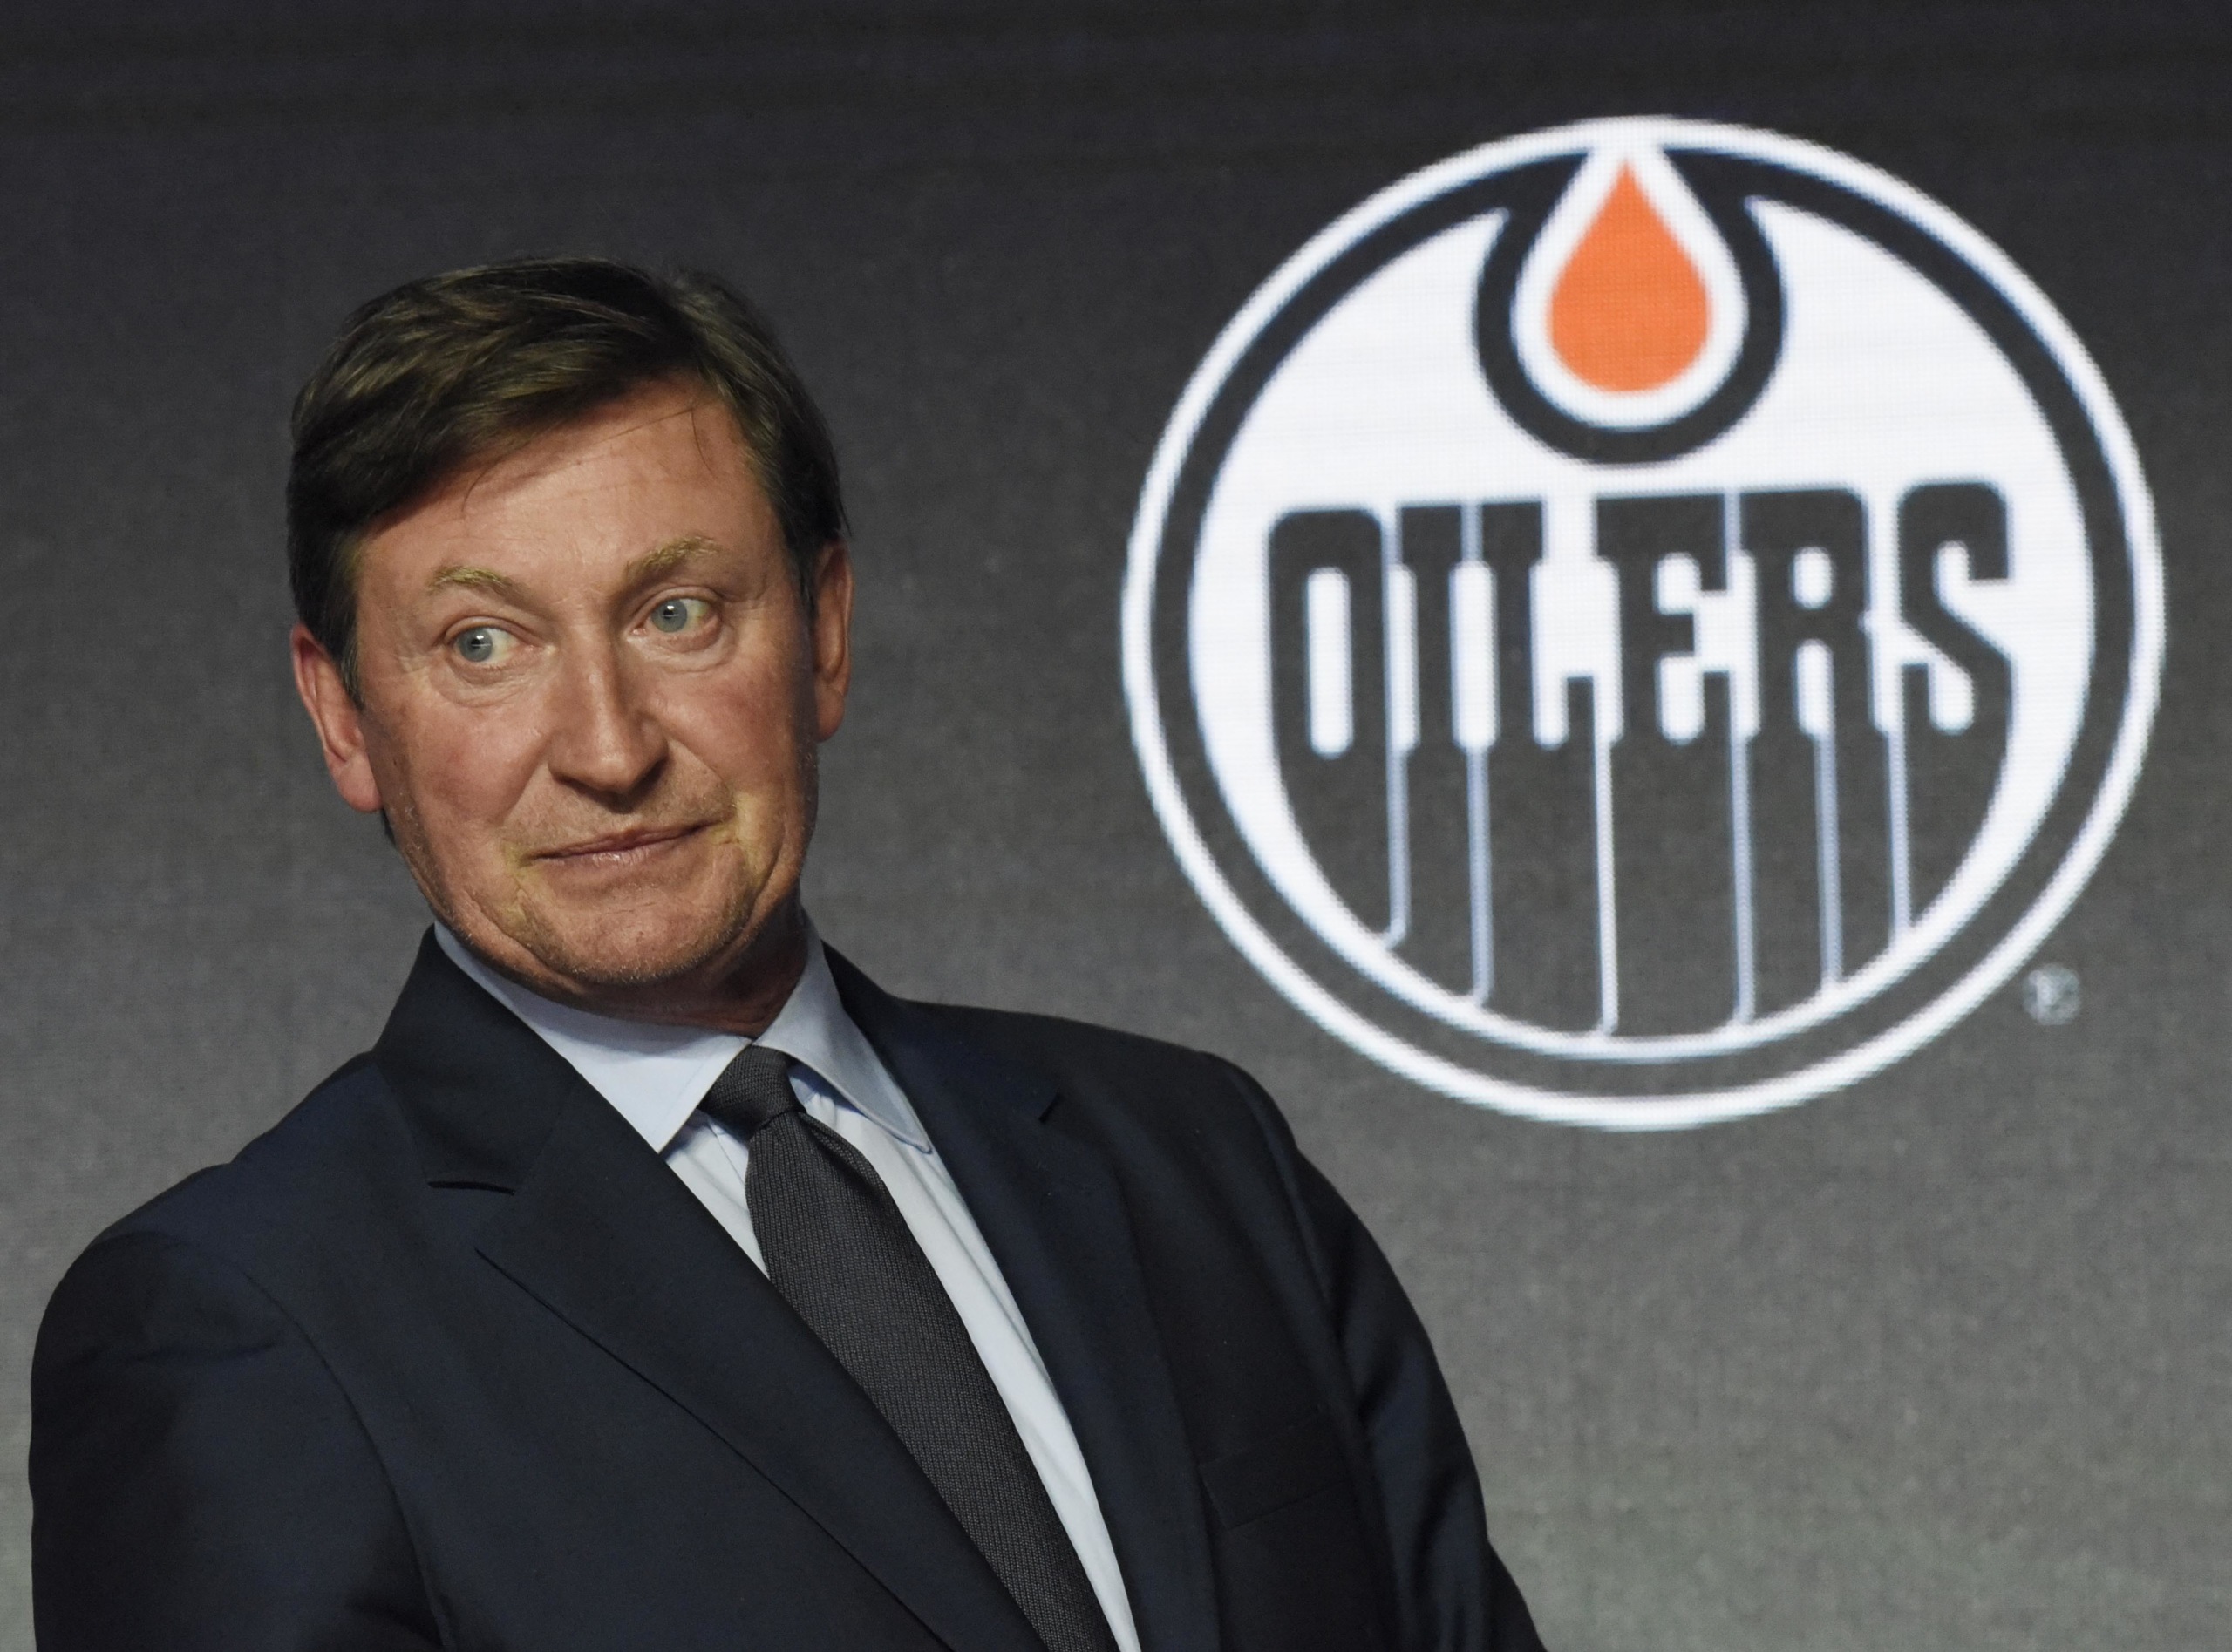 TNT and ESPN Both Want Wayne Gretzky for NHL Coverage